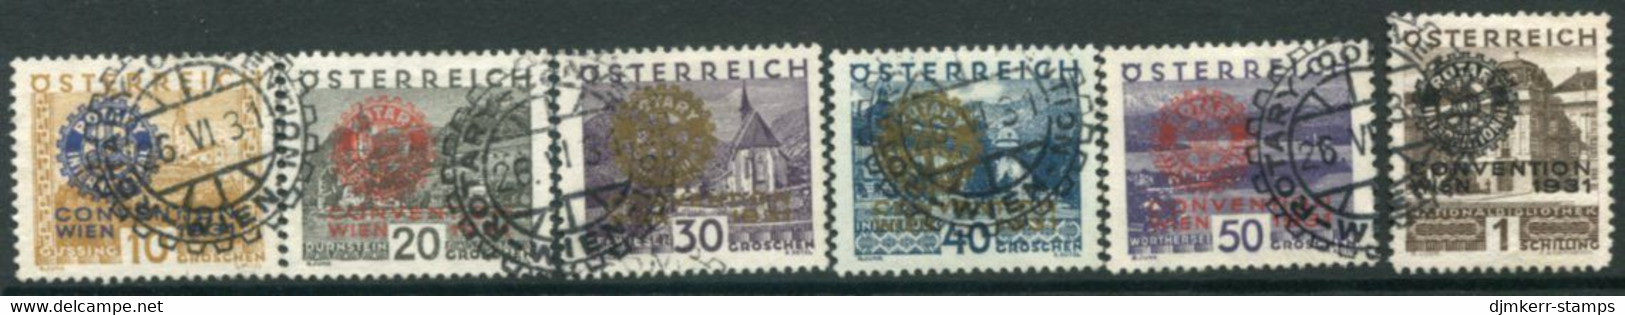 AUSTRIA 1931 Rotarian Congress Set Used. Michel 518-23 - Used Stamps